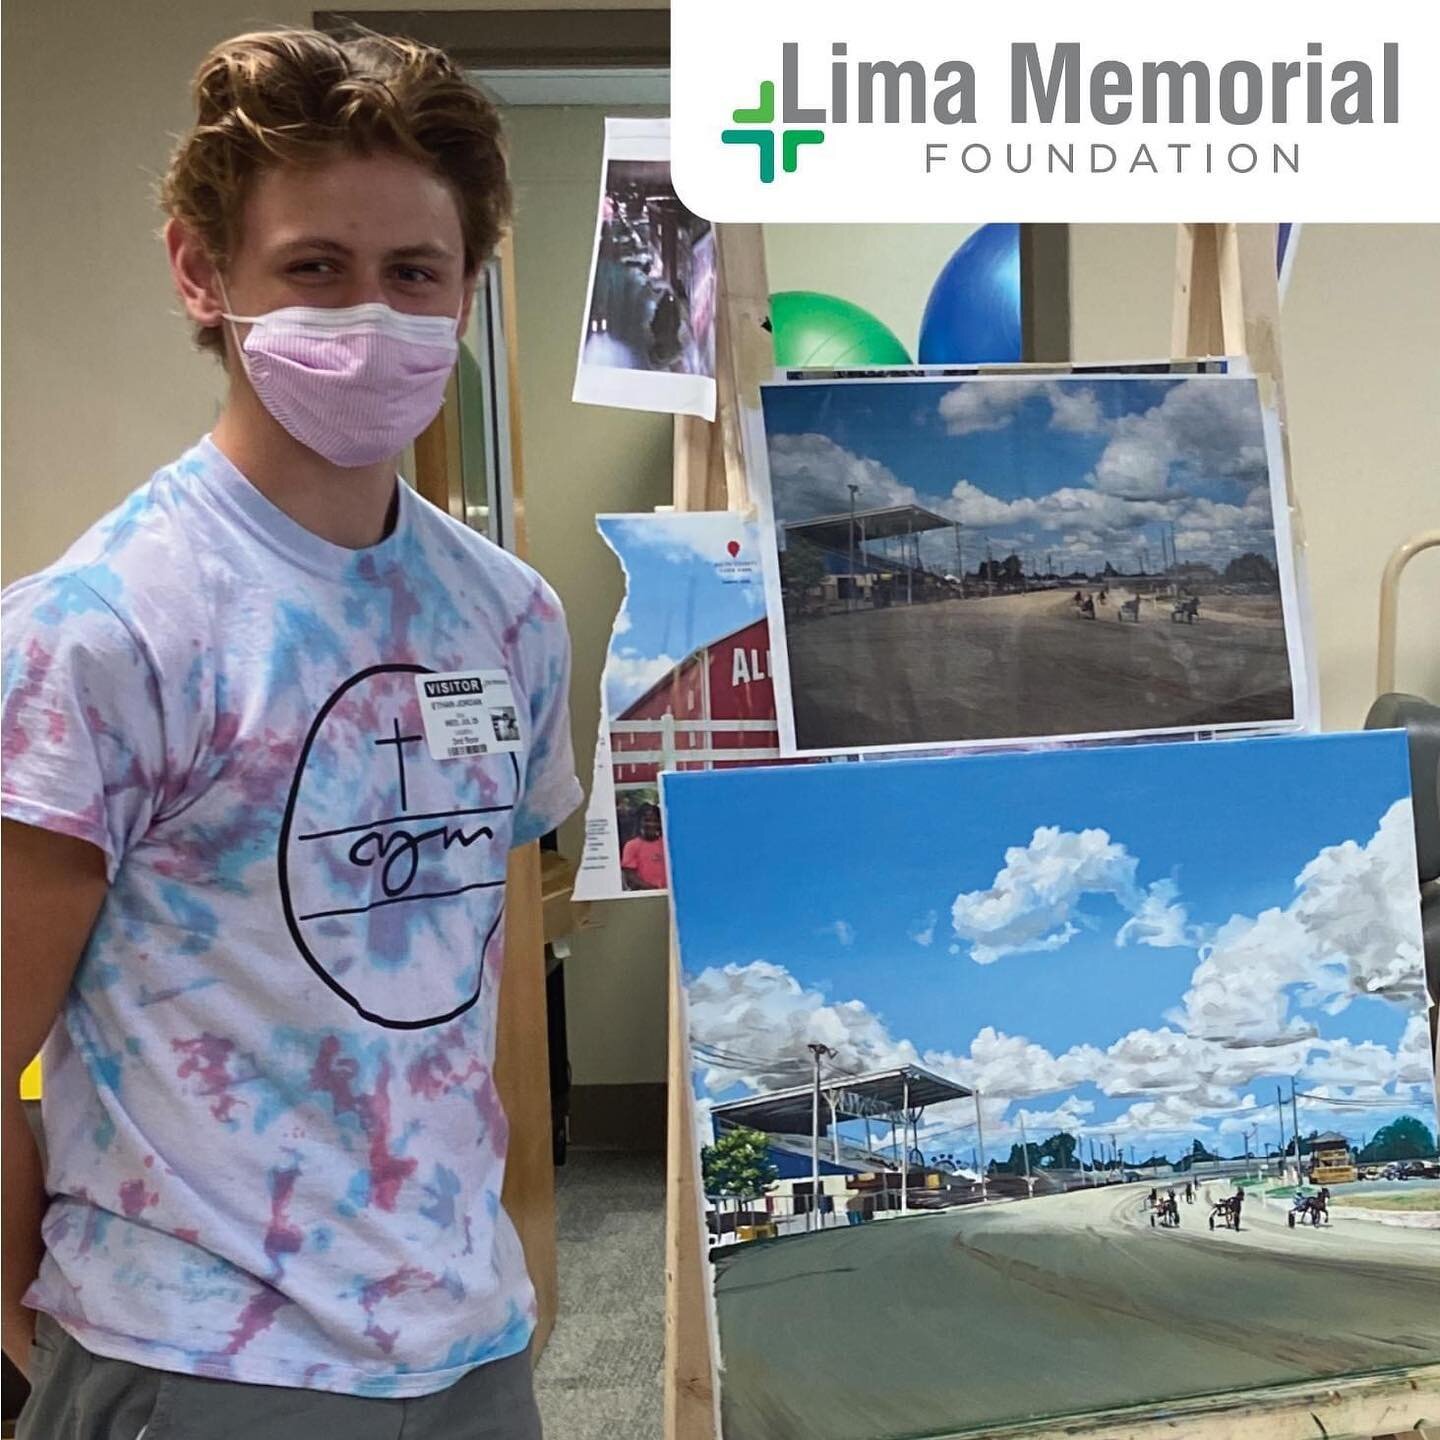 Art plays a powerful role in bringing comfort and relief to those receiving treatment or care in a hospital setting. We are proud to be uniting art and therapy through the work of Ethan Jordan, an aspiring, young artist and Lima resident, in our futu